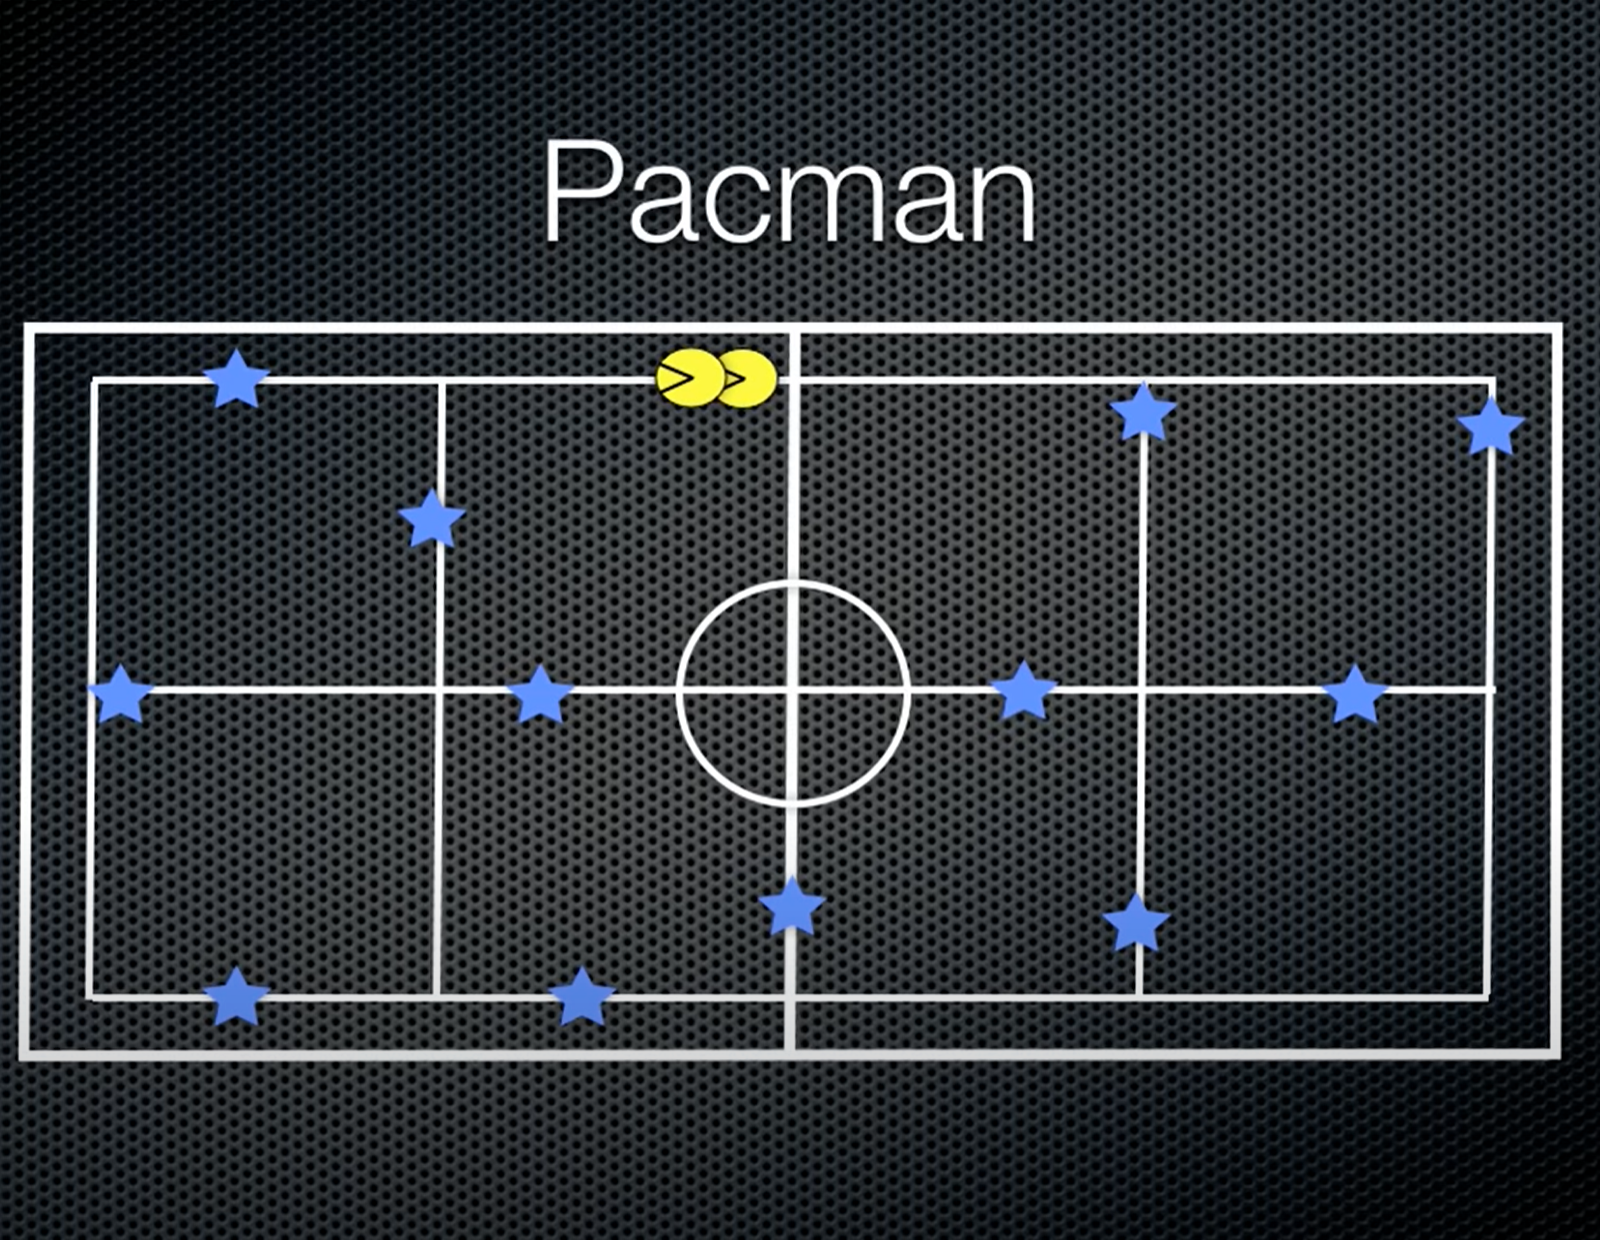 Diagram of how to play Pac-man tag.